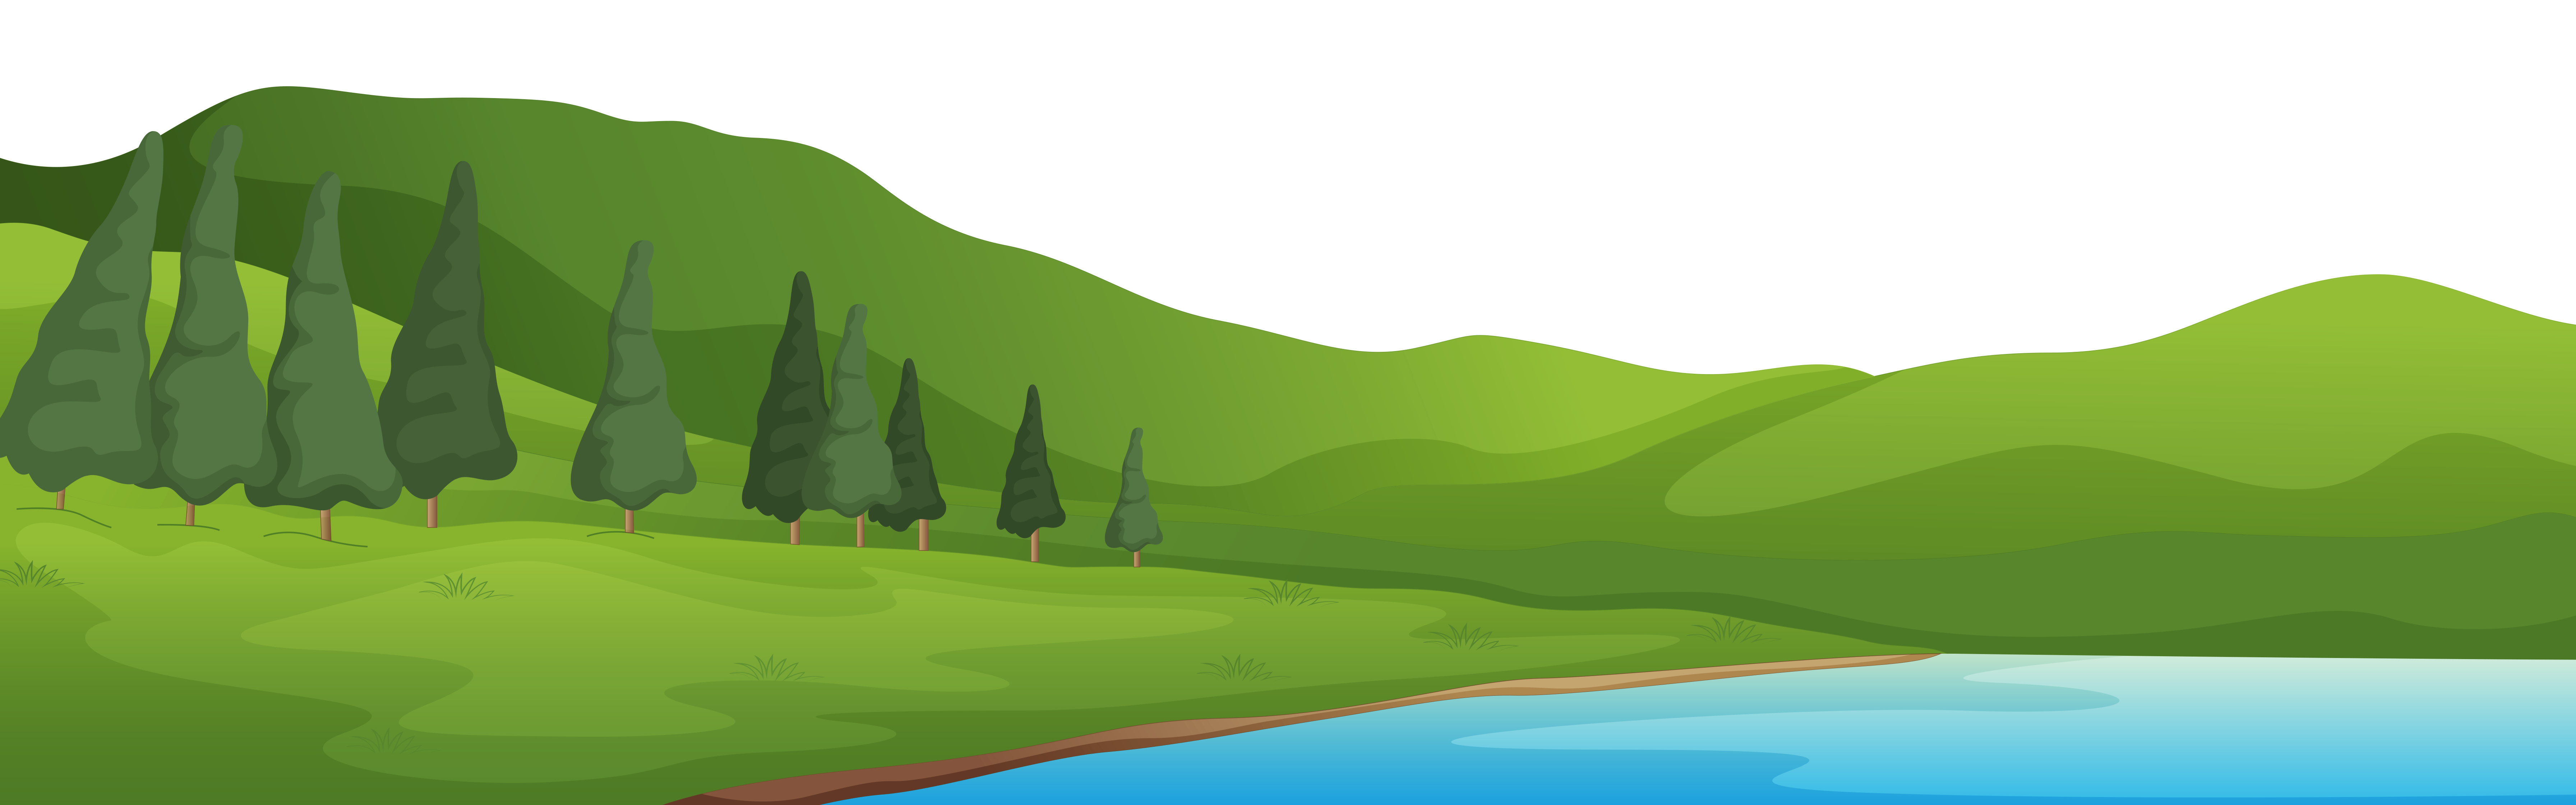 And lake ground png. Mountain clipart banner